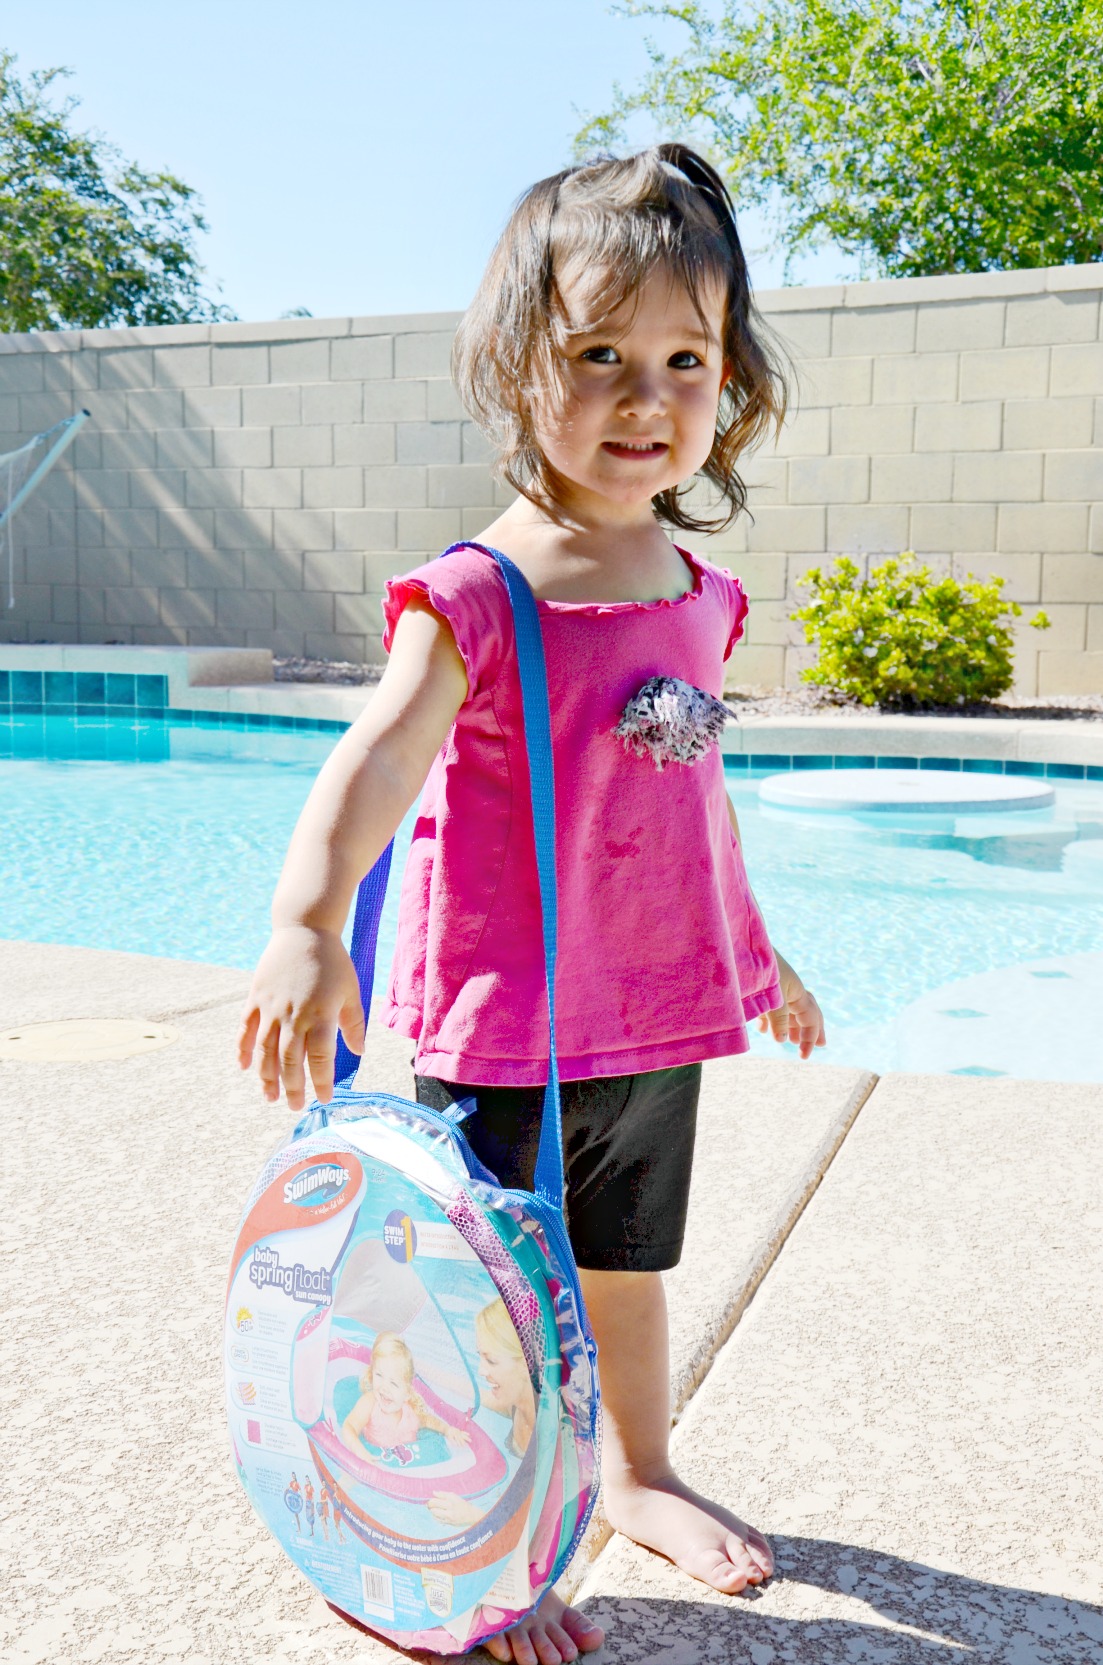 See how you can teach your child water safety with the best baby float for home pool safety. SwimWays Baby Spring Float Sun Canopy is safe and easy to use.